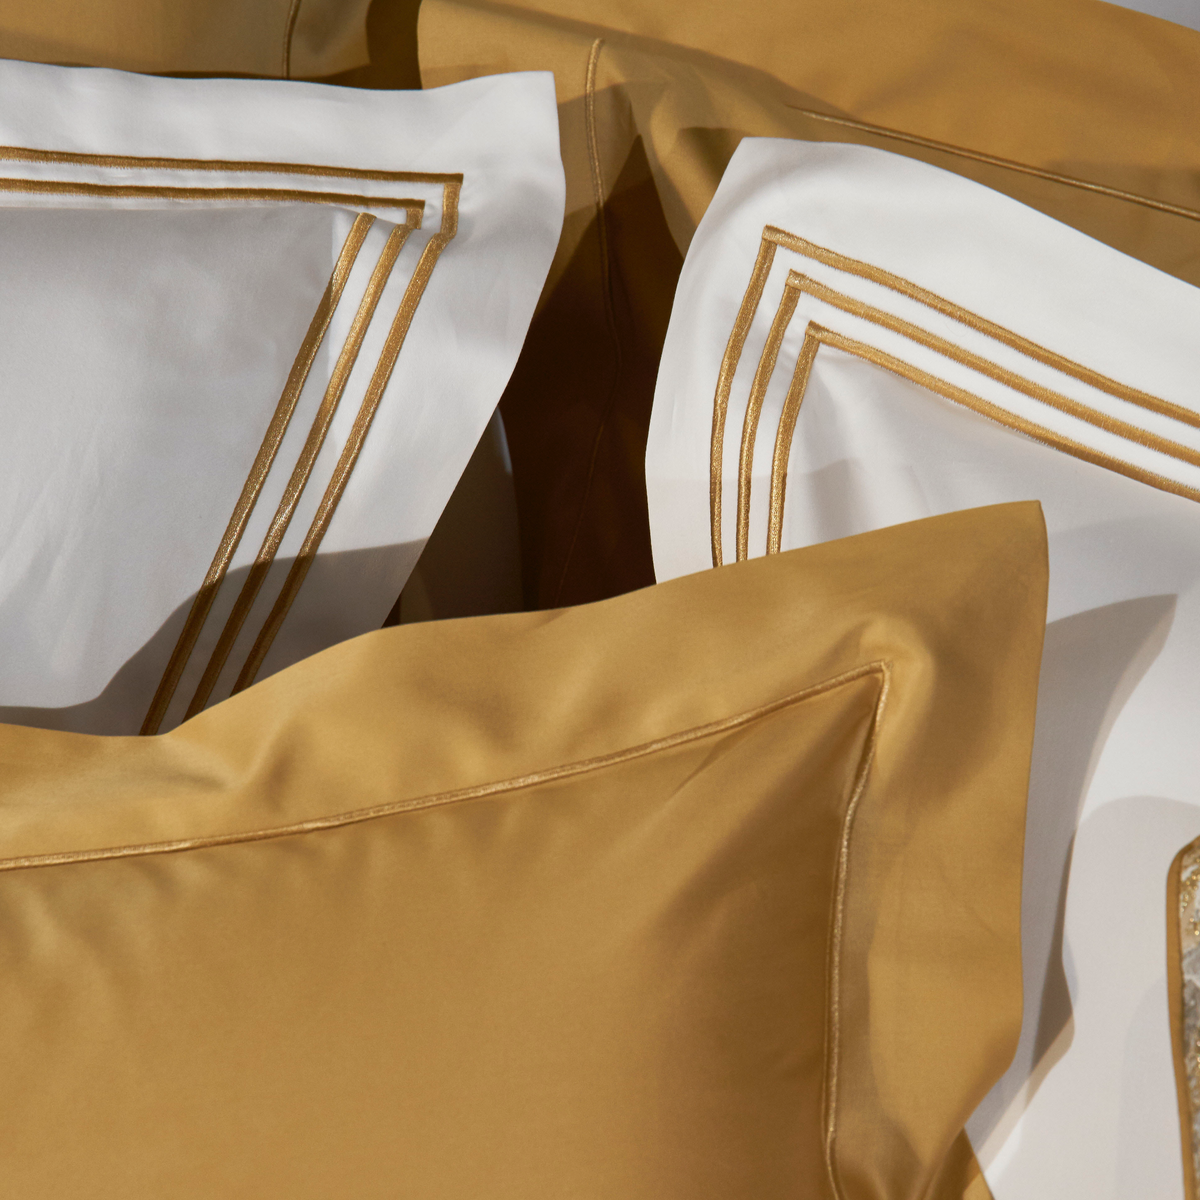 Assorted Pillowcases in Gold Color with Celso de Lemos Ram Collection